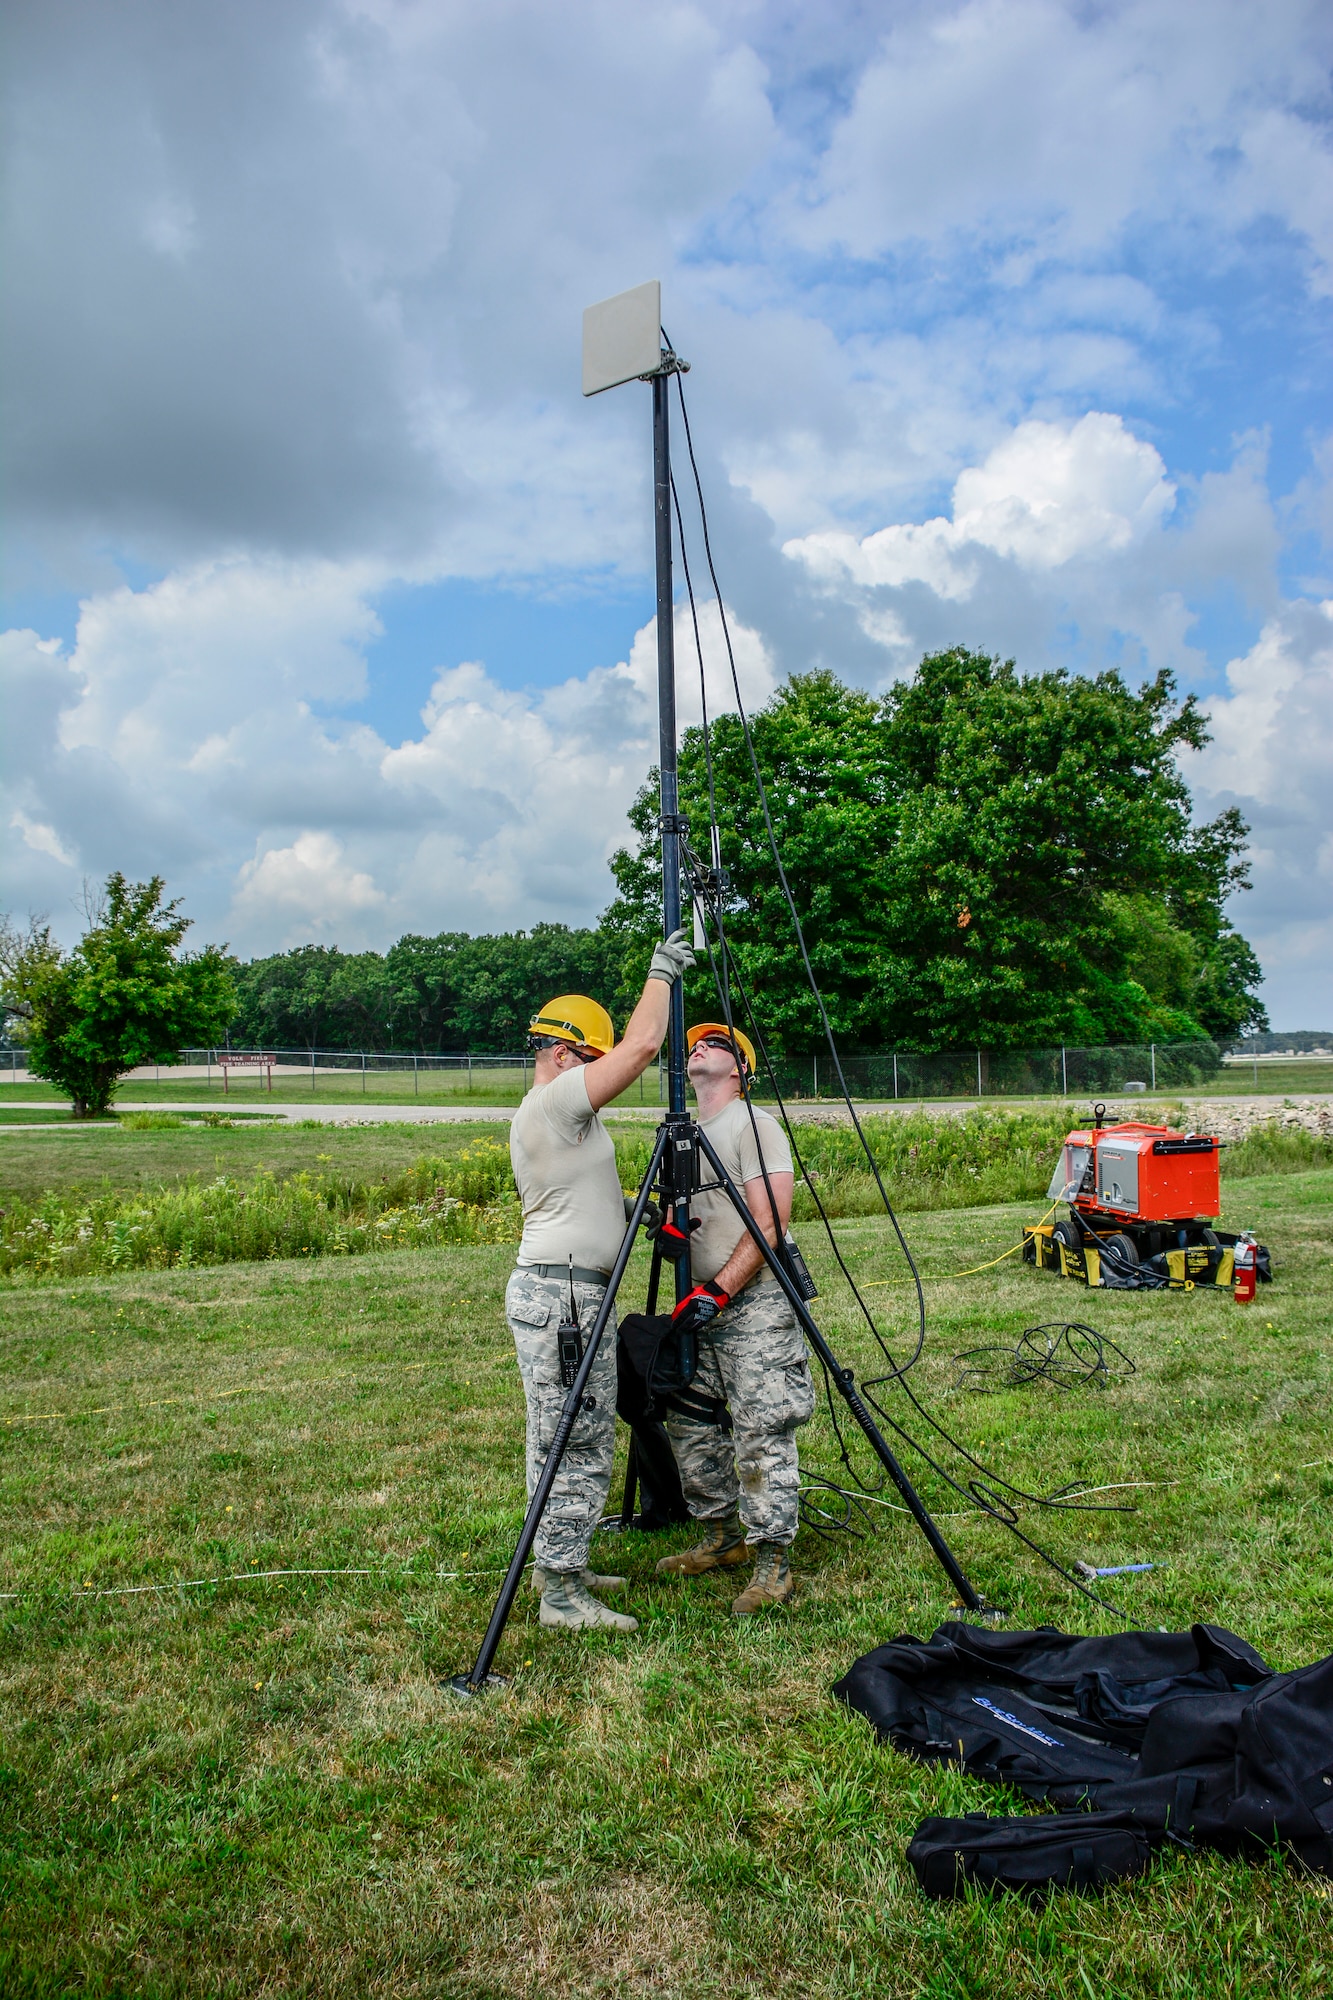 Staff Sgt. Nickolas Dykstra and Staff Sgt. Ryan Malecki, Joint Incident Site Communications Capability operators with the 115th Fighter Wing work together to set up a wireless internet antennae mast for the Wisconsin Chemical, Biological, Radiological, Nuclear and High Yield Explosive Enhanced Response Force Package External Evaluation exercise at Volk Field Air National Guard Base, Aug. 16, 2018. The ExEval is conducted as a way to re-validate the WI CERFP to perform its CBRN Response Enterprise mission in support of the State and Nation.(U.S. Air National Guard photo by Tech. Sgt. Mary E. Greenwood)